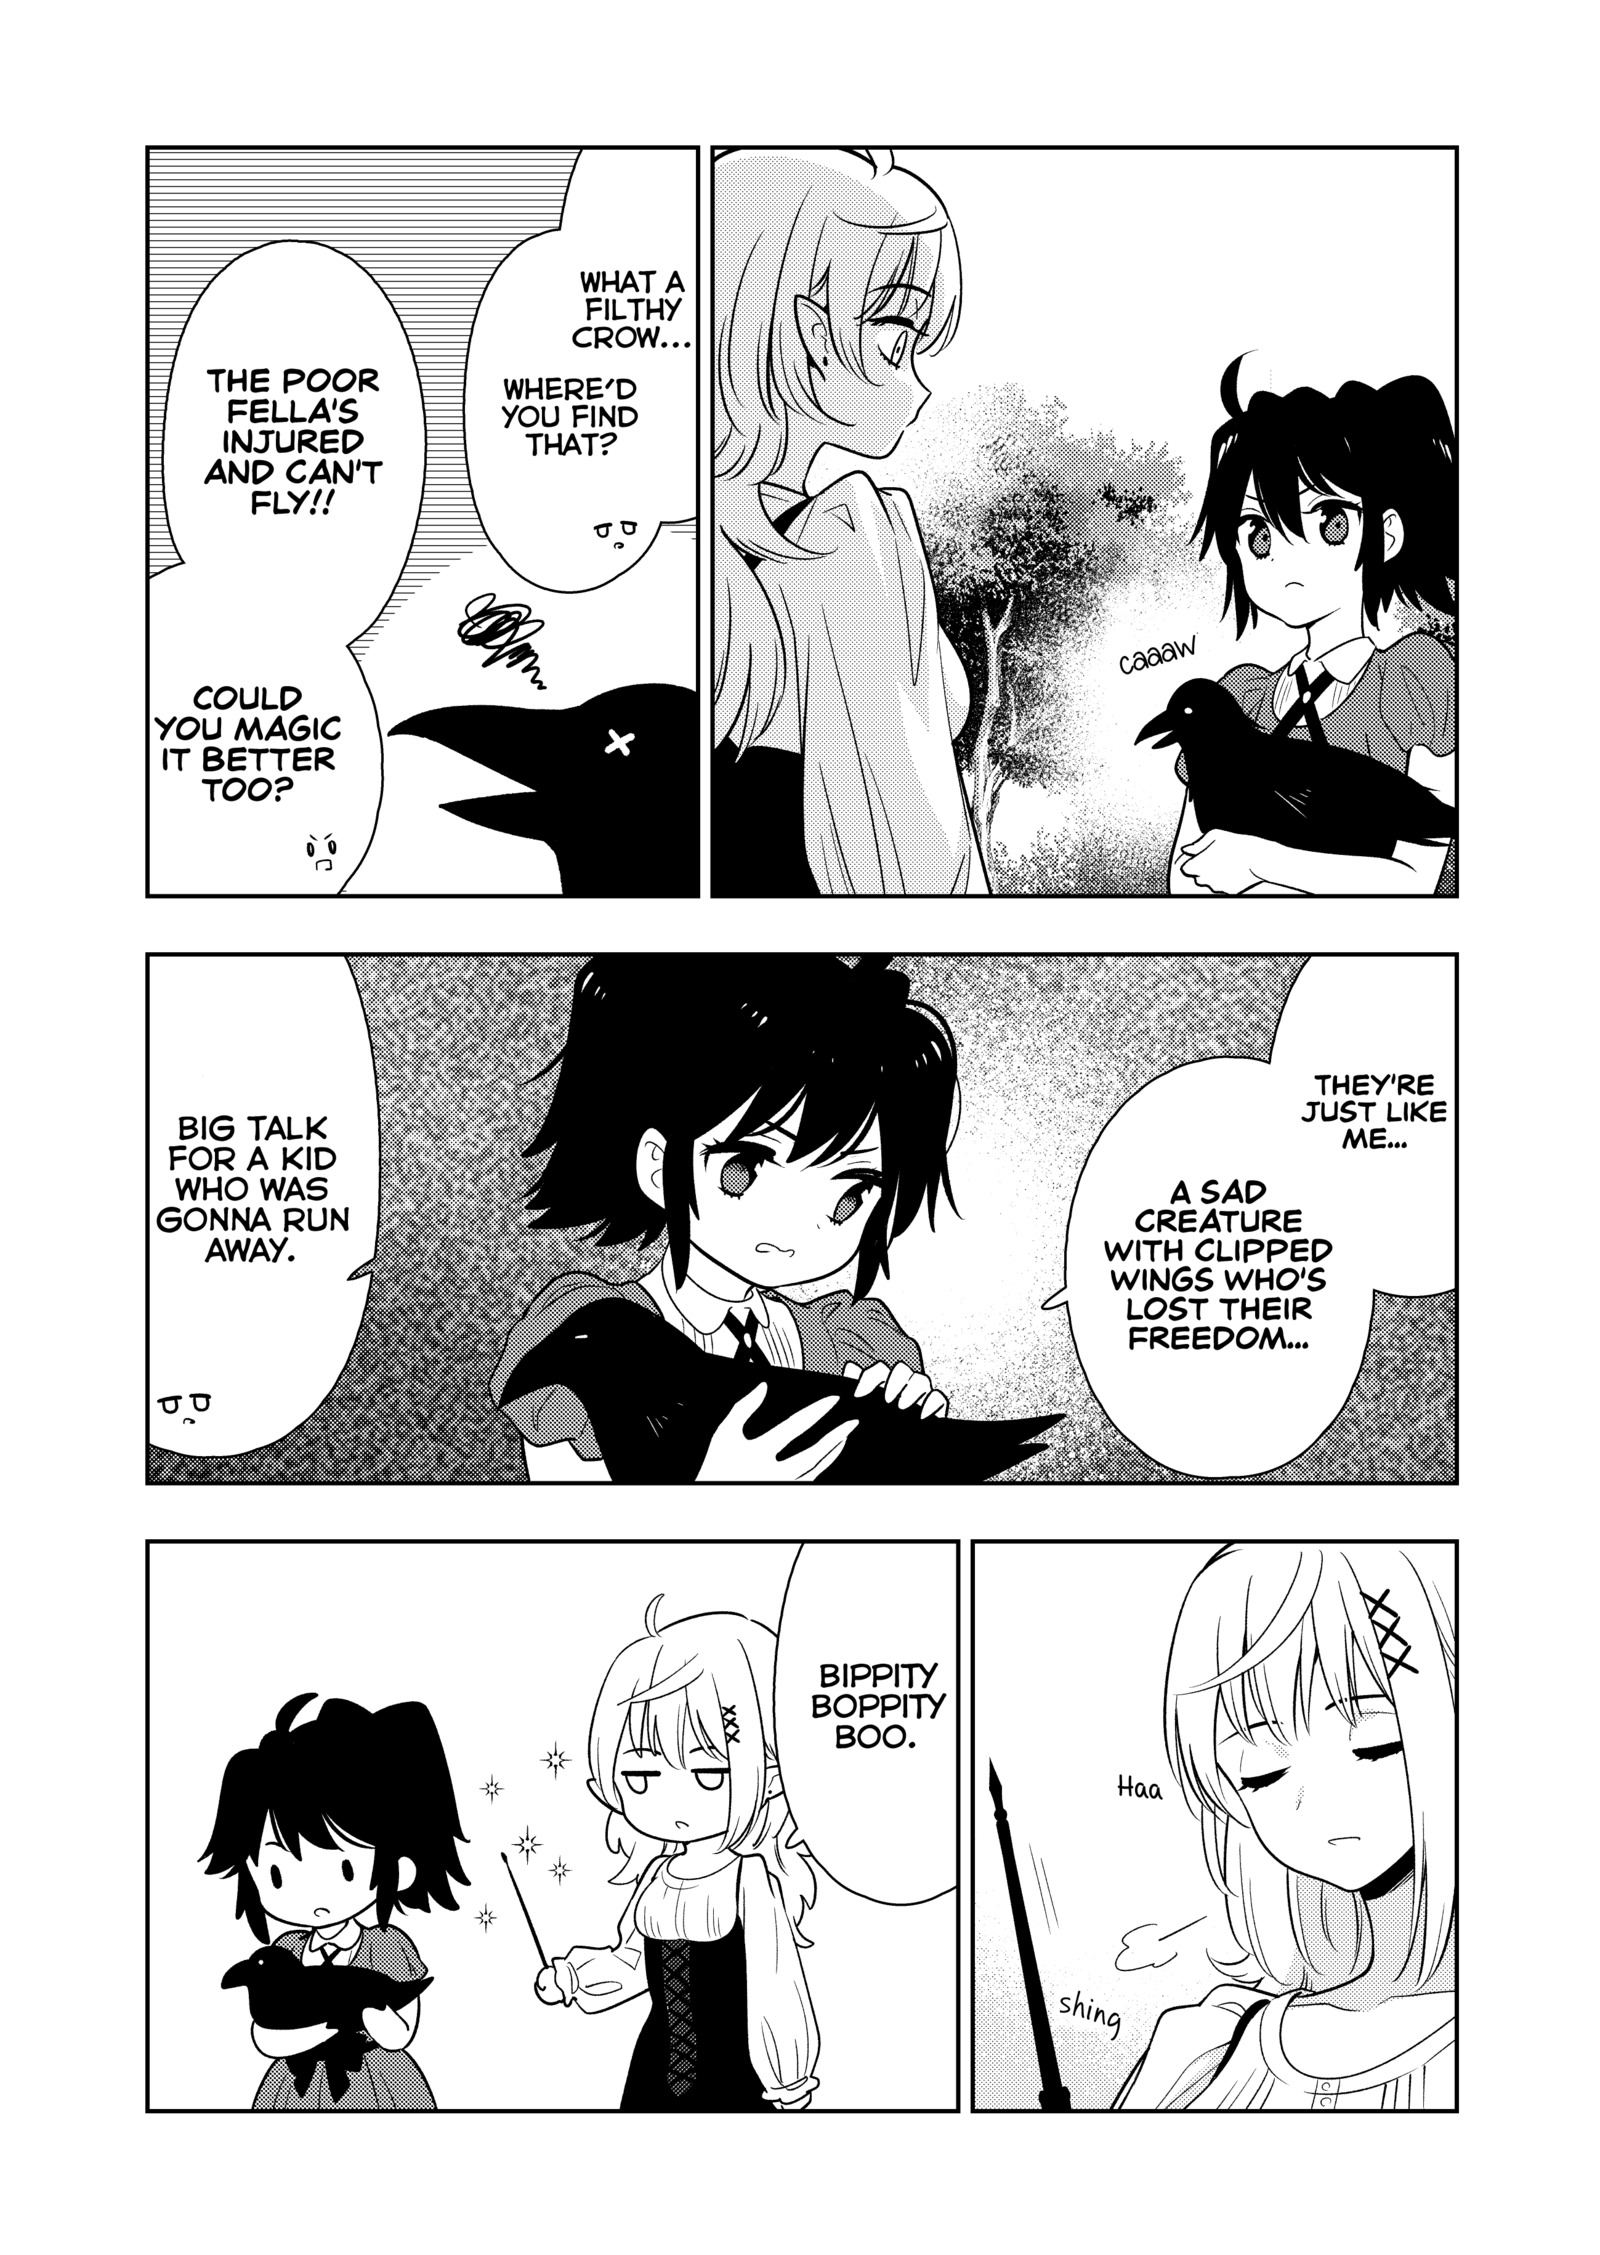 The Struggle-Free Life of the Witch's Sacrifice ch.3